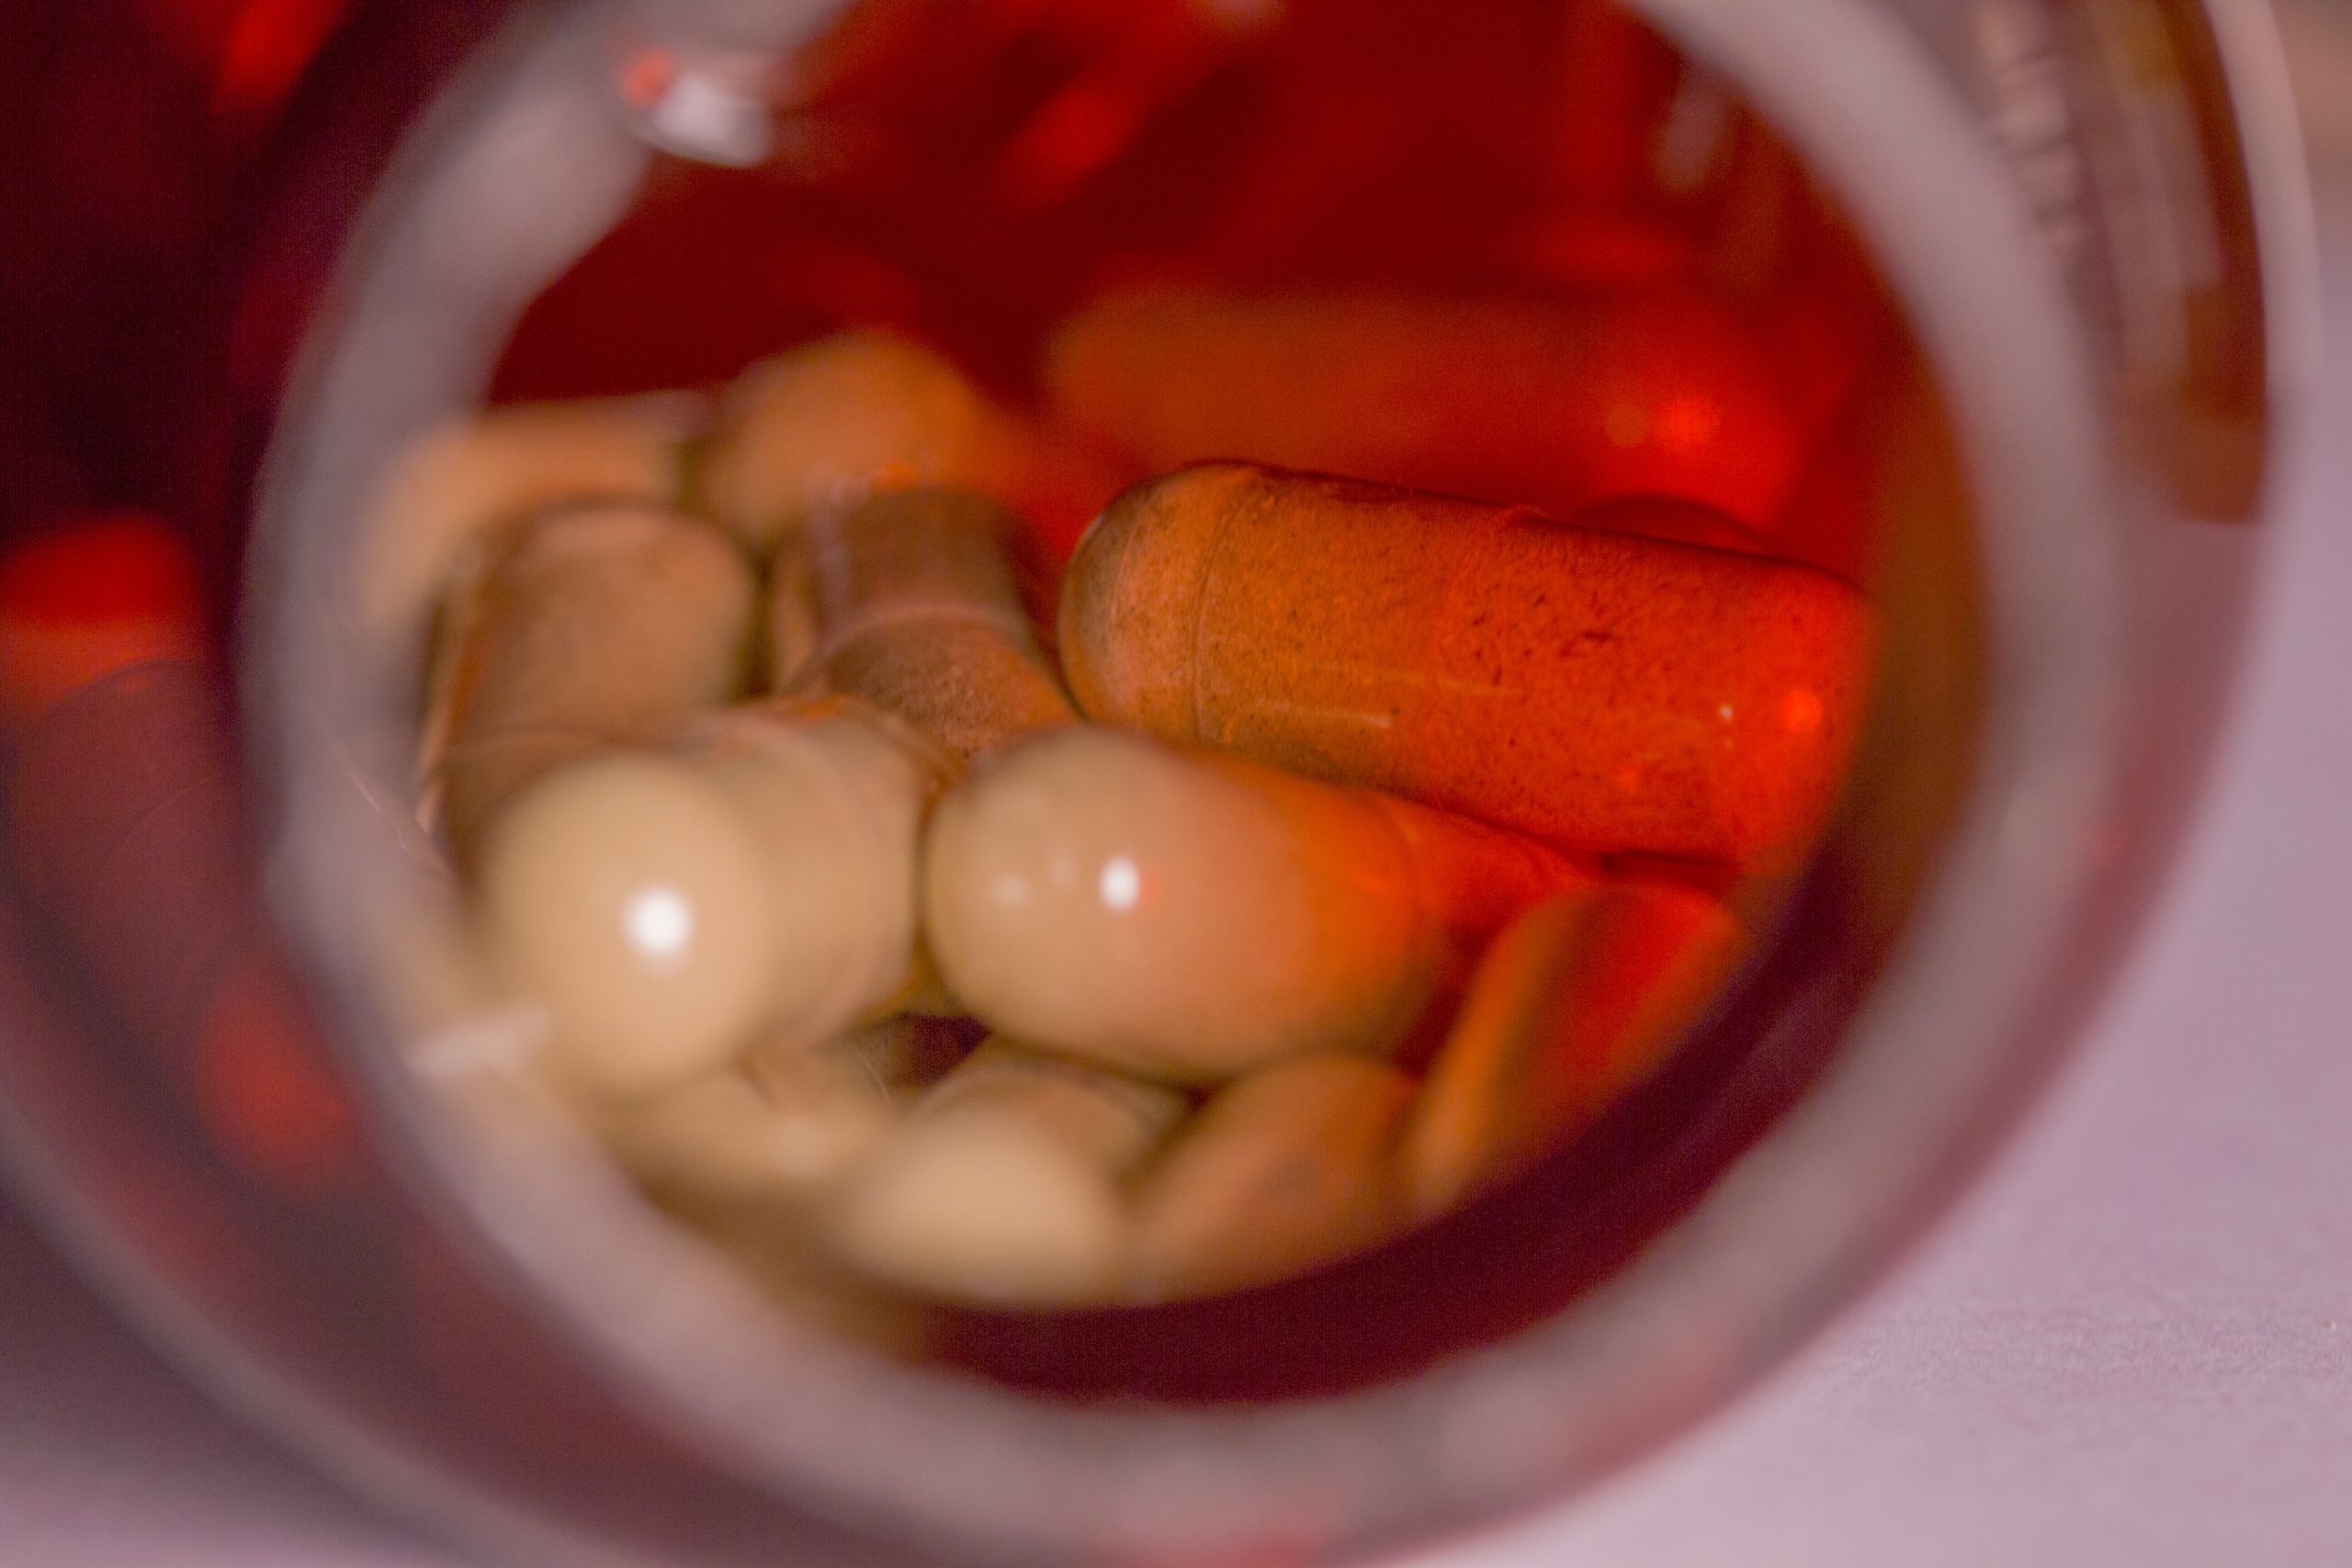 Closeup of tan herbal supplements inside of a red plastic bottle.